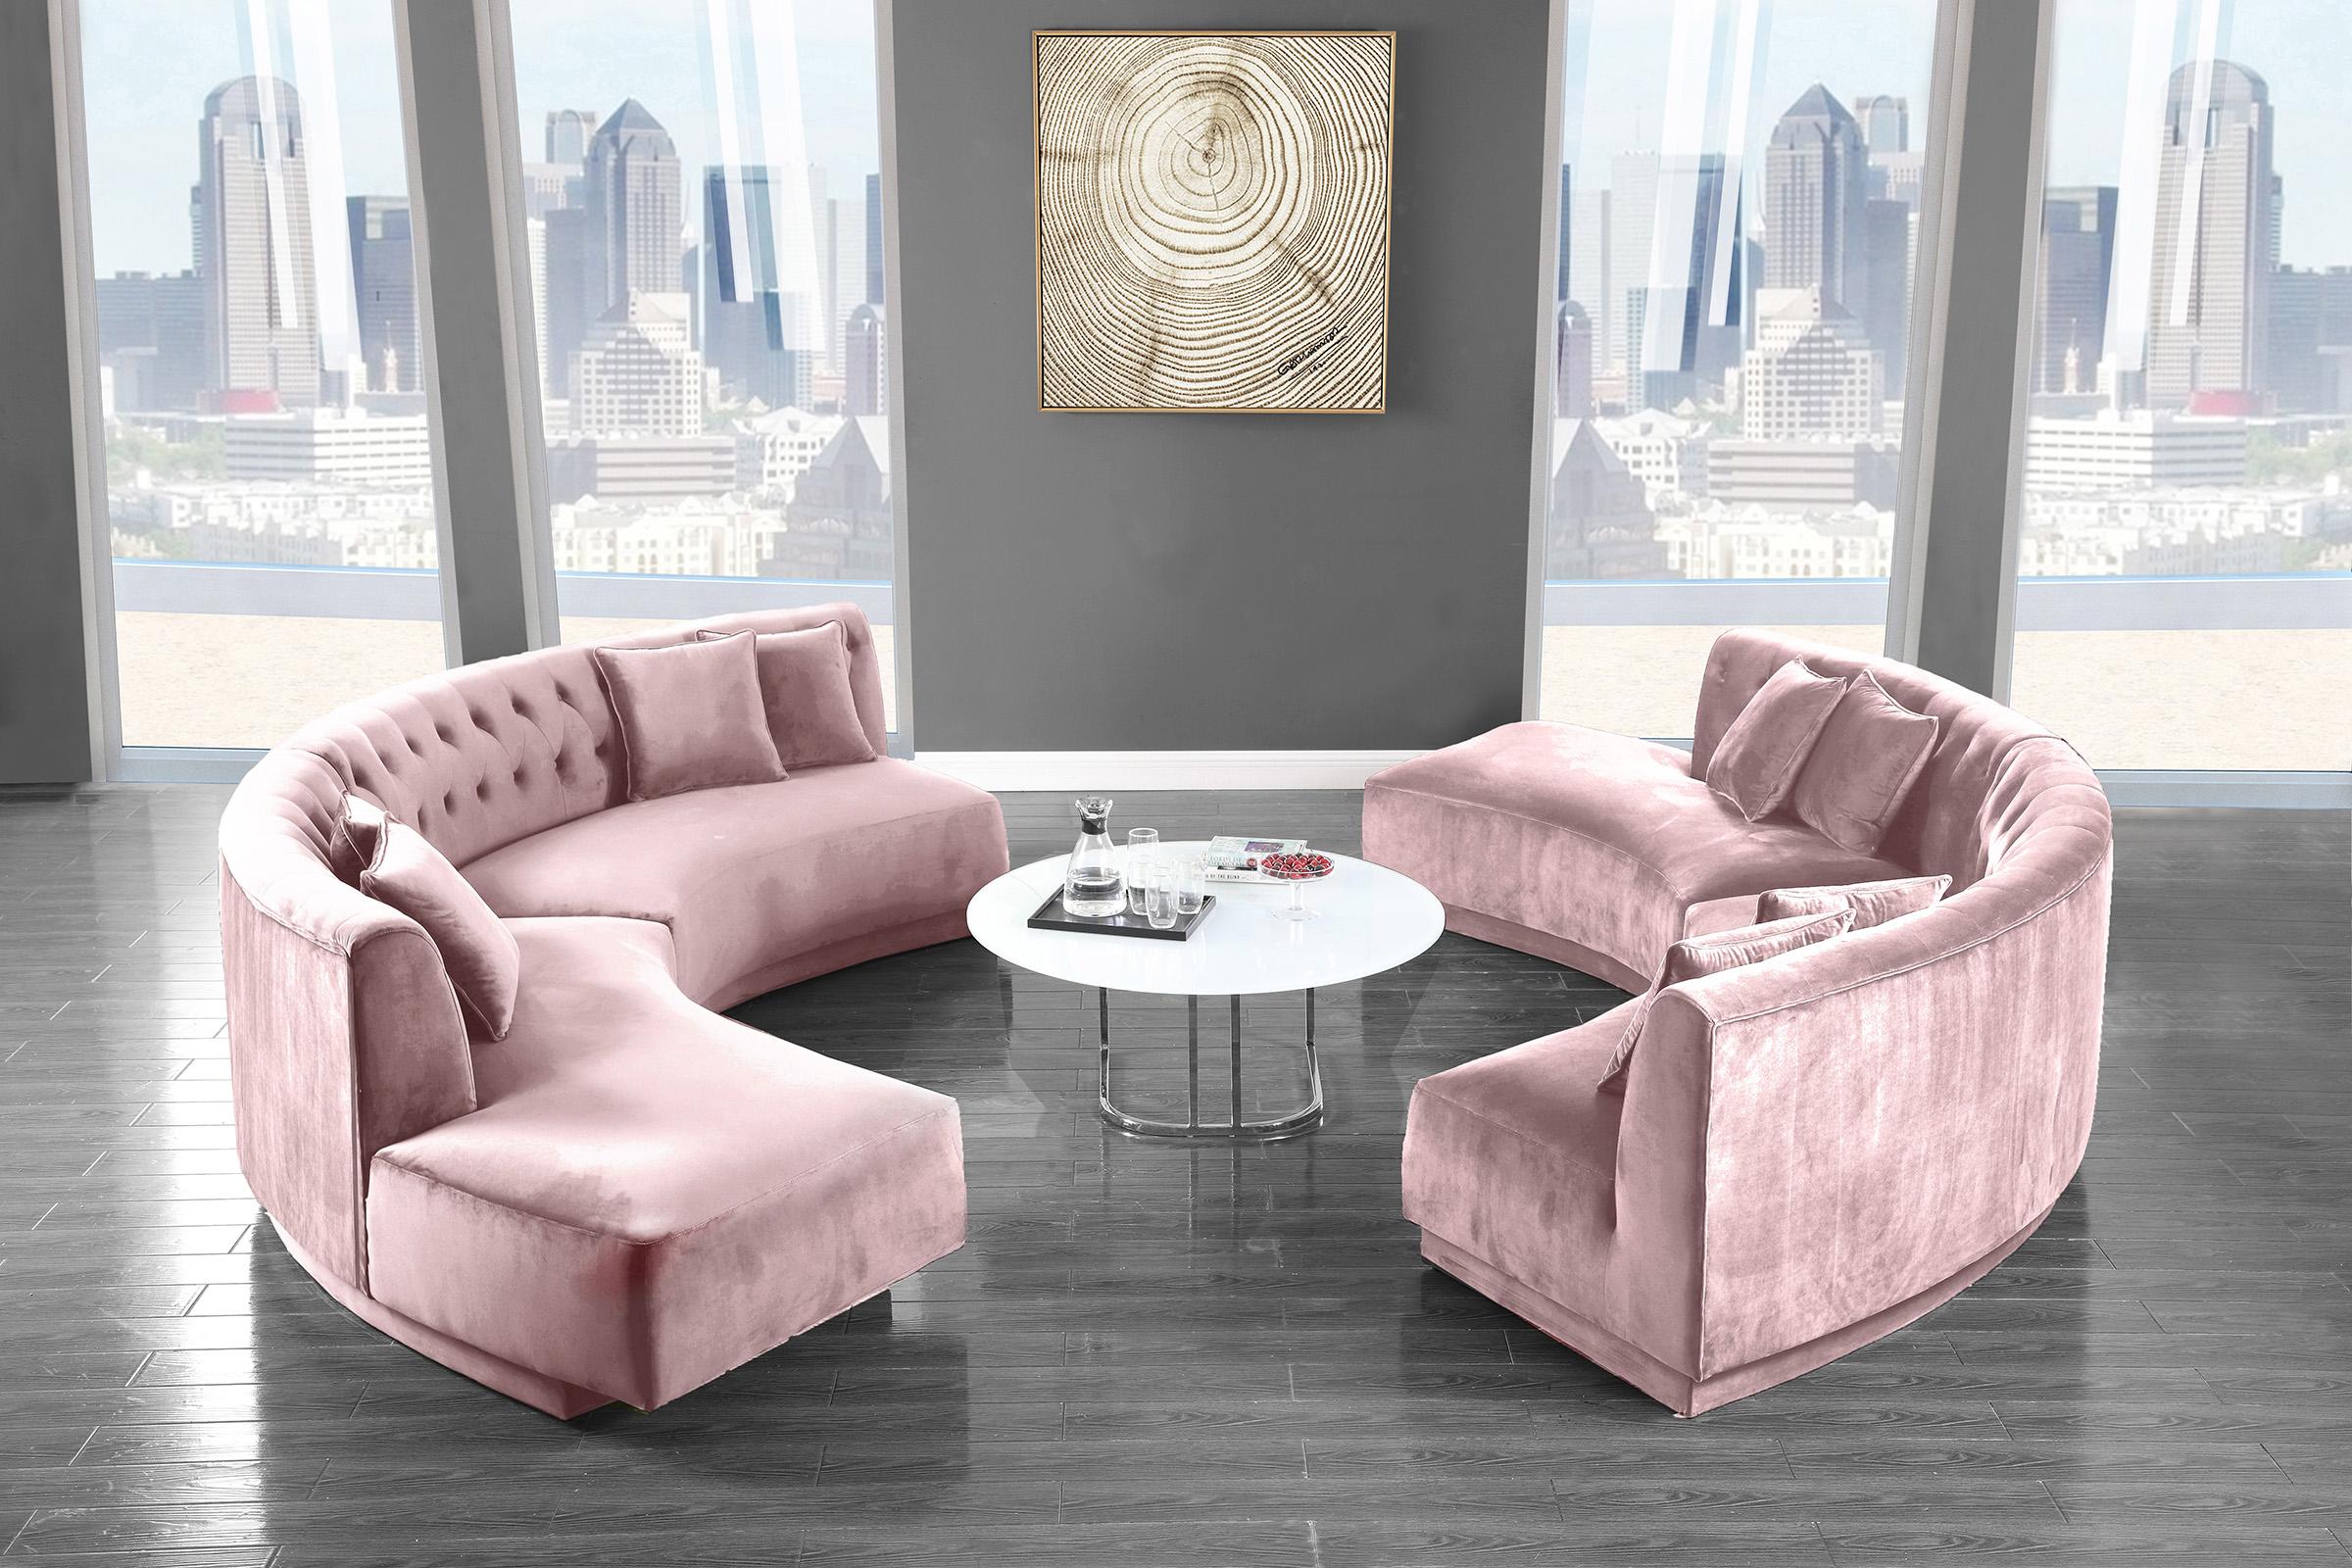 

    
641Pink-Sectional Pink Velvet Tufted Sectional Sofa KENZI 641Pink Meridian Contemporary Modern
